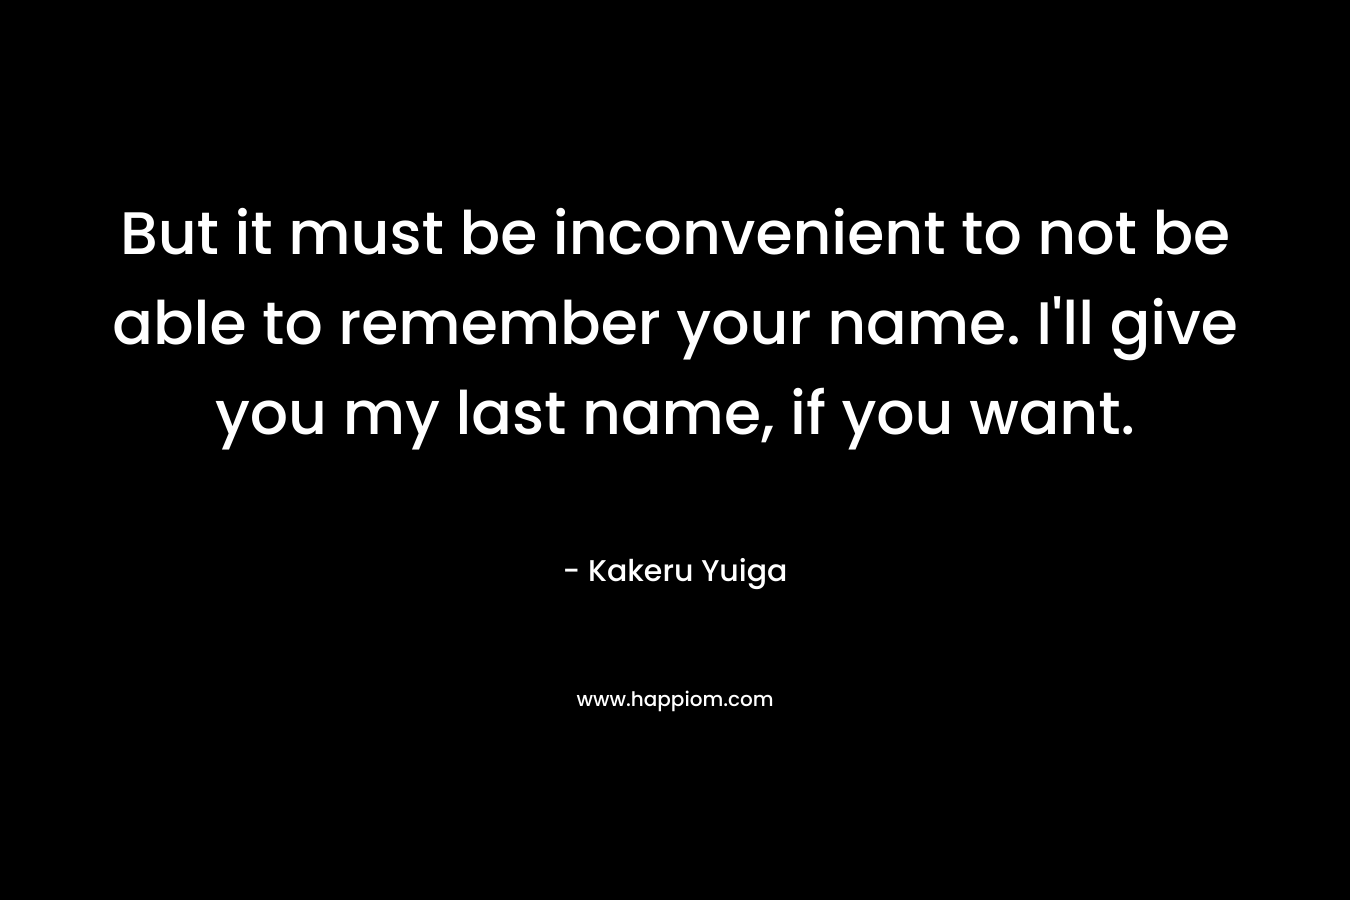 But it must be inconvenient to not be able to remember your name. I'll give you my last name, if you want.